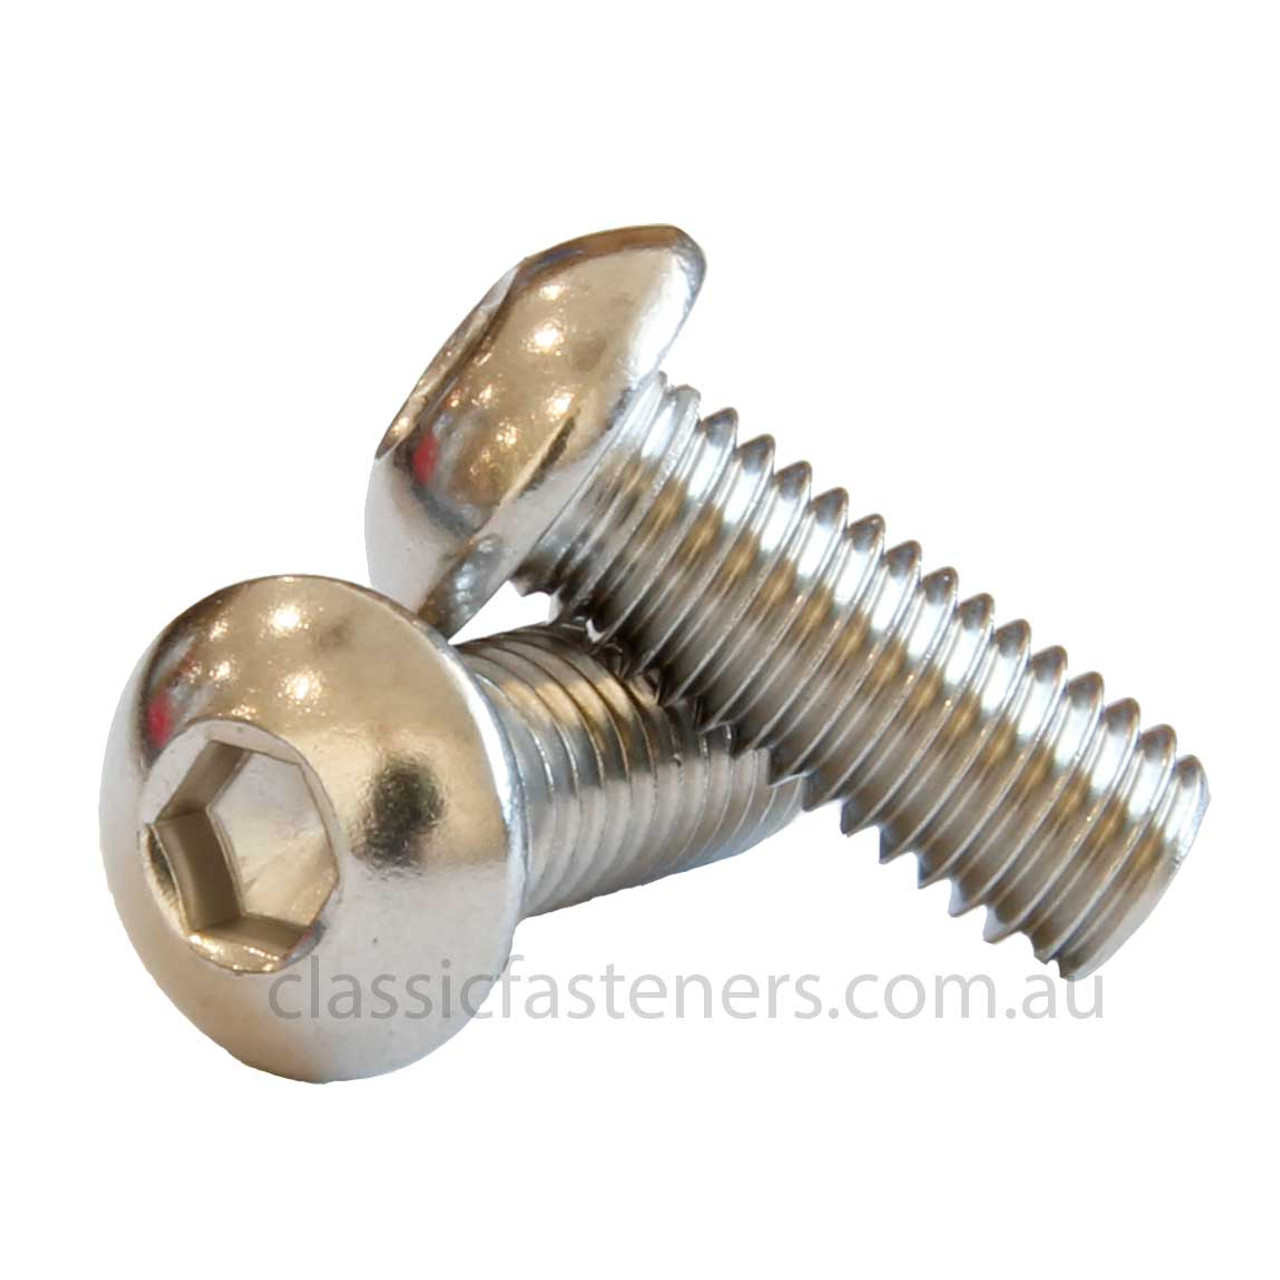 3/8 - 16 UNC x 1 1/2 Button Head Socket Screw Stainless (304)